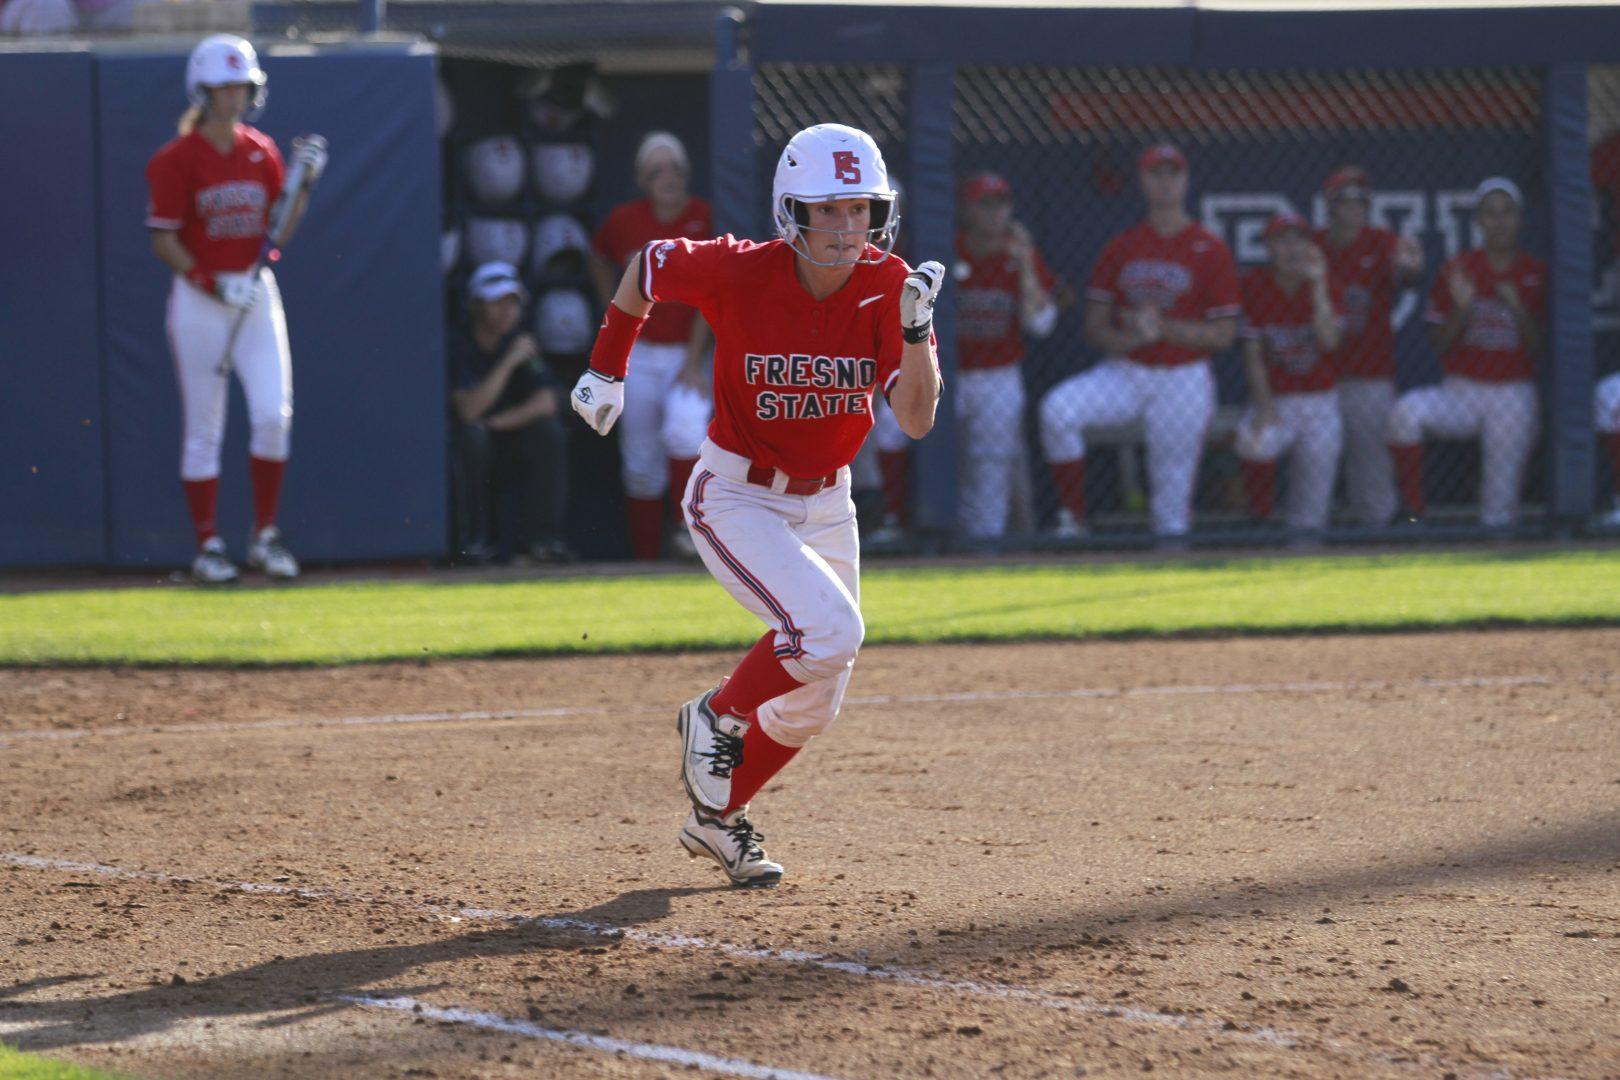 Fresno State left fielder Kapri Angotti dashes toward first base after connecting on a softball pitch. One of Angotti’s lessons taught under head coach Trisha Ford was to “hit the ball and run.” Photo by Geoff Thurner/The Collegian